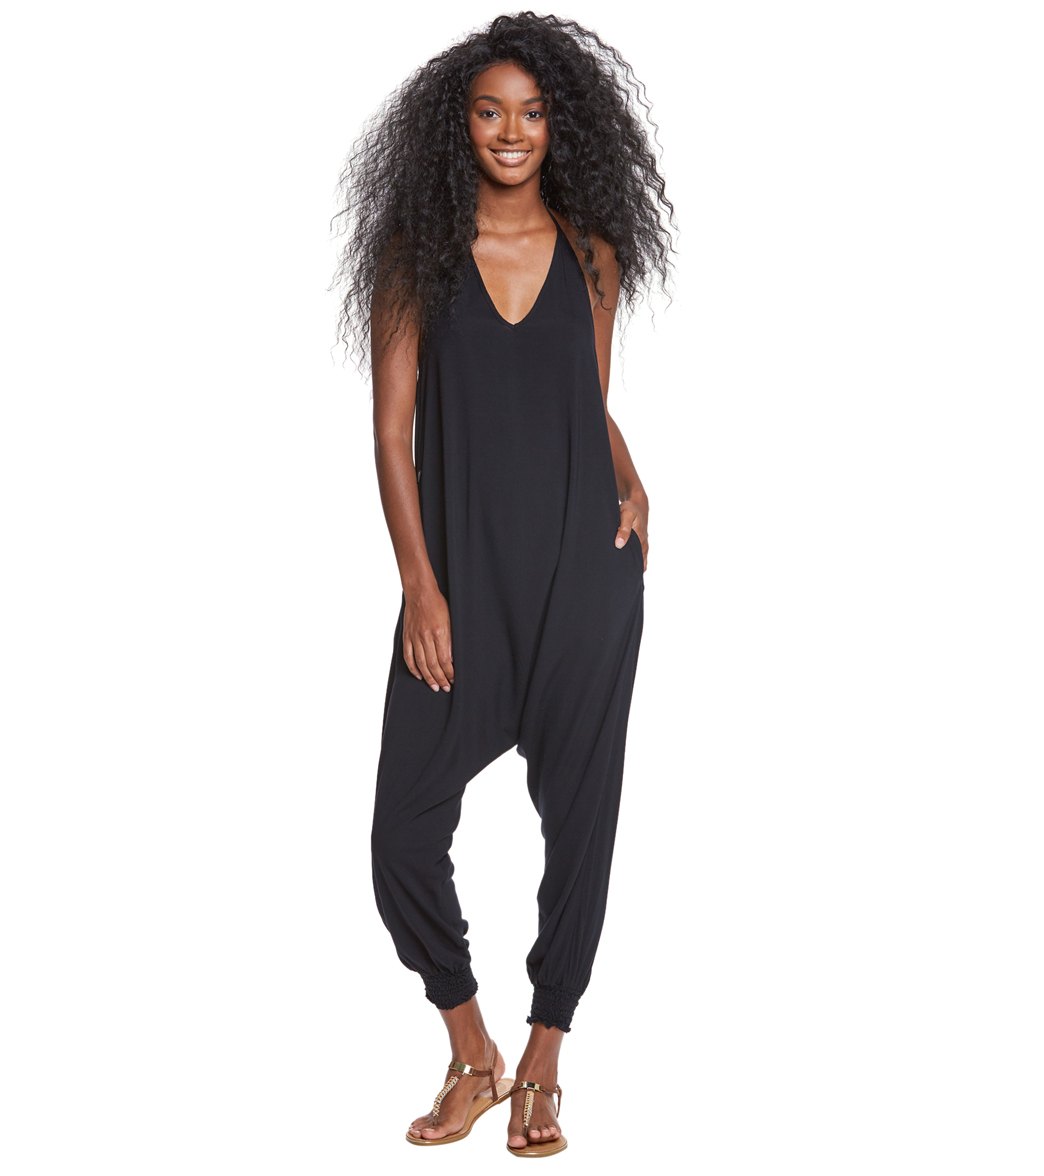 BLACK RACER BACK HAREM JUMPSUIT WITH LARGE FRONT POCKETS & BANDEA TOP –  Snooty Tude Luxe n Trends